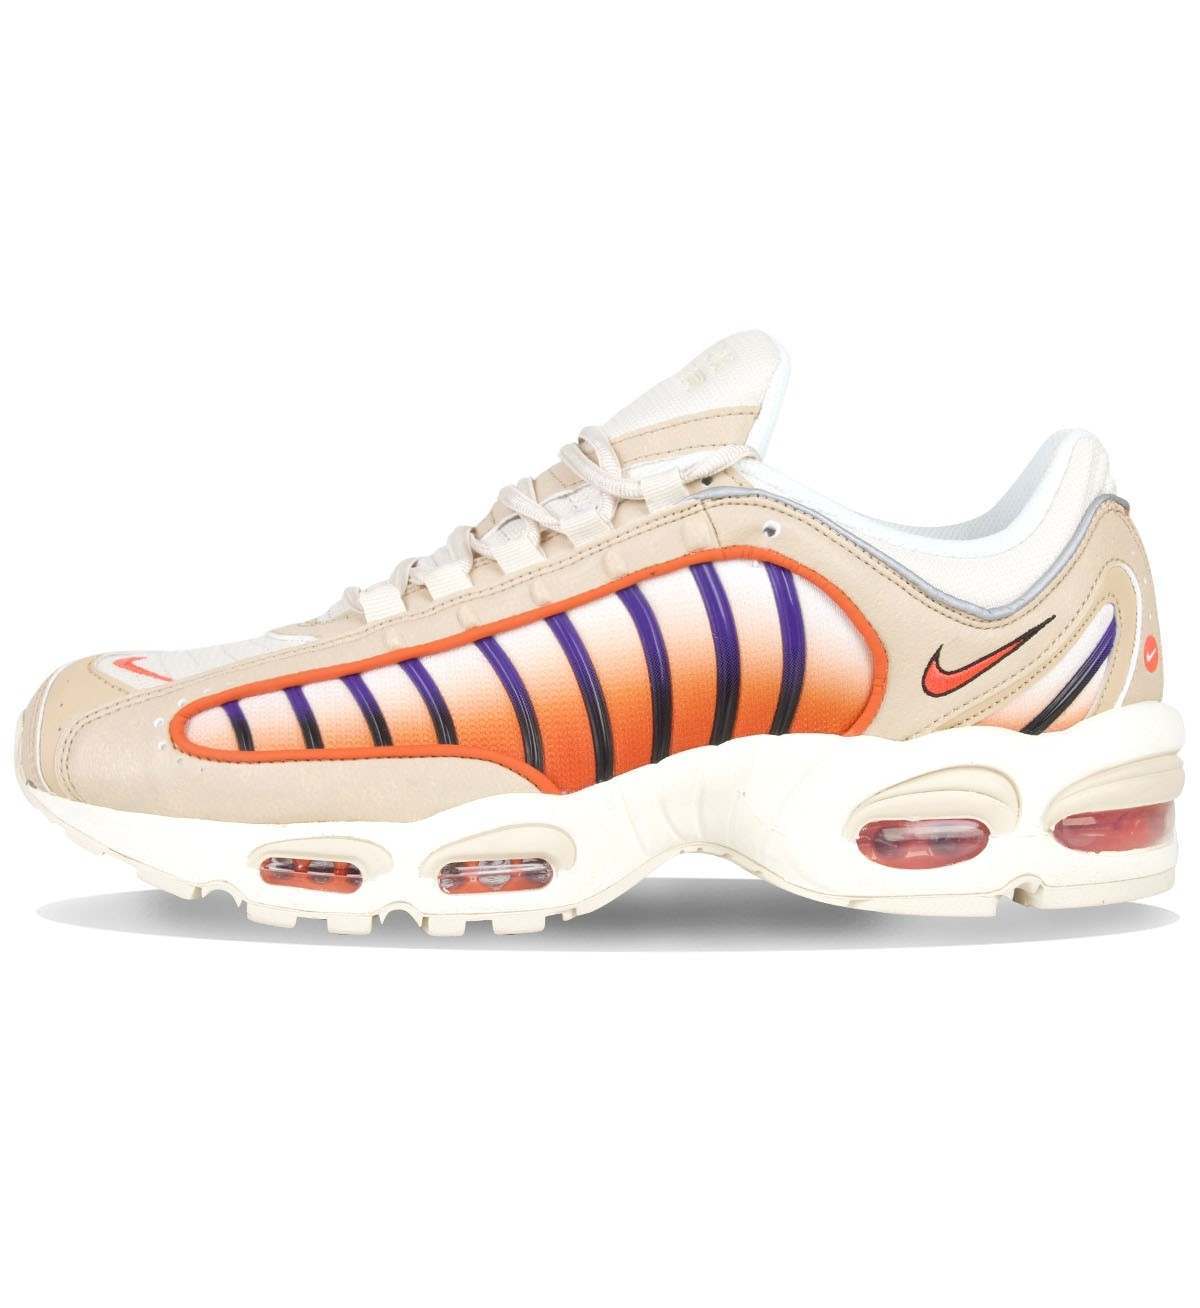 50% off Nike Air Max Tailwind IV | Buyandship SG | Shop Worldwide and ...